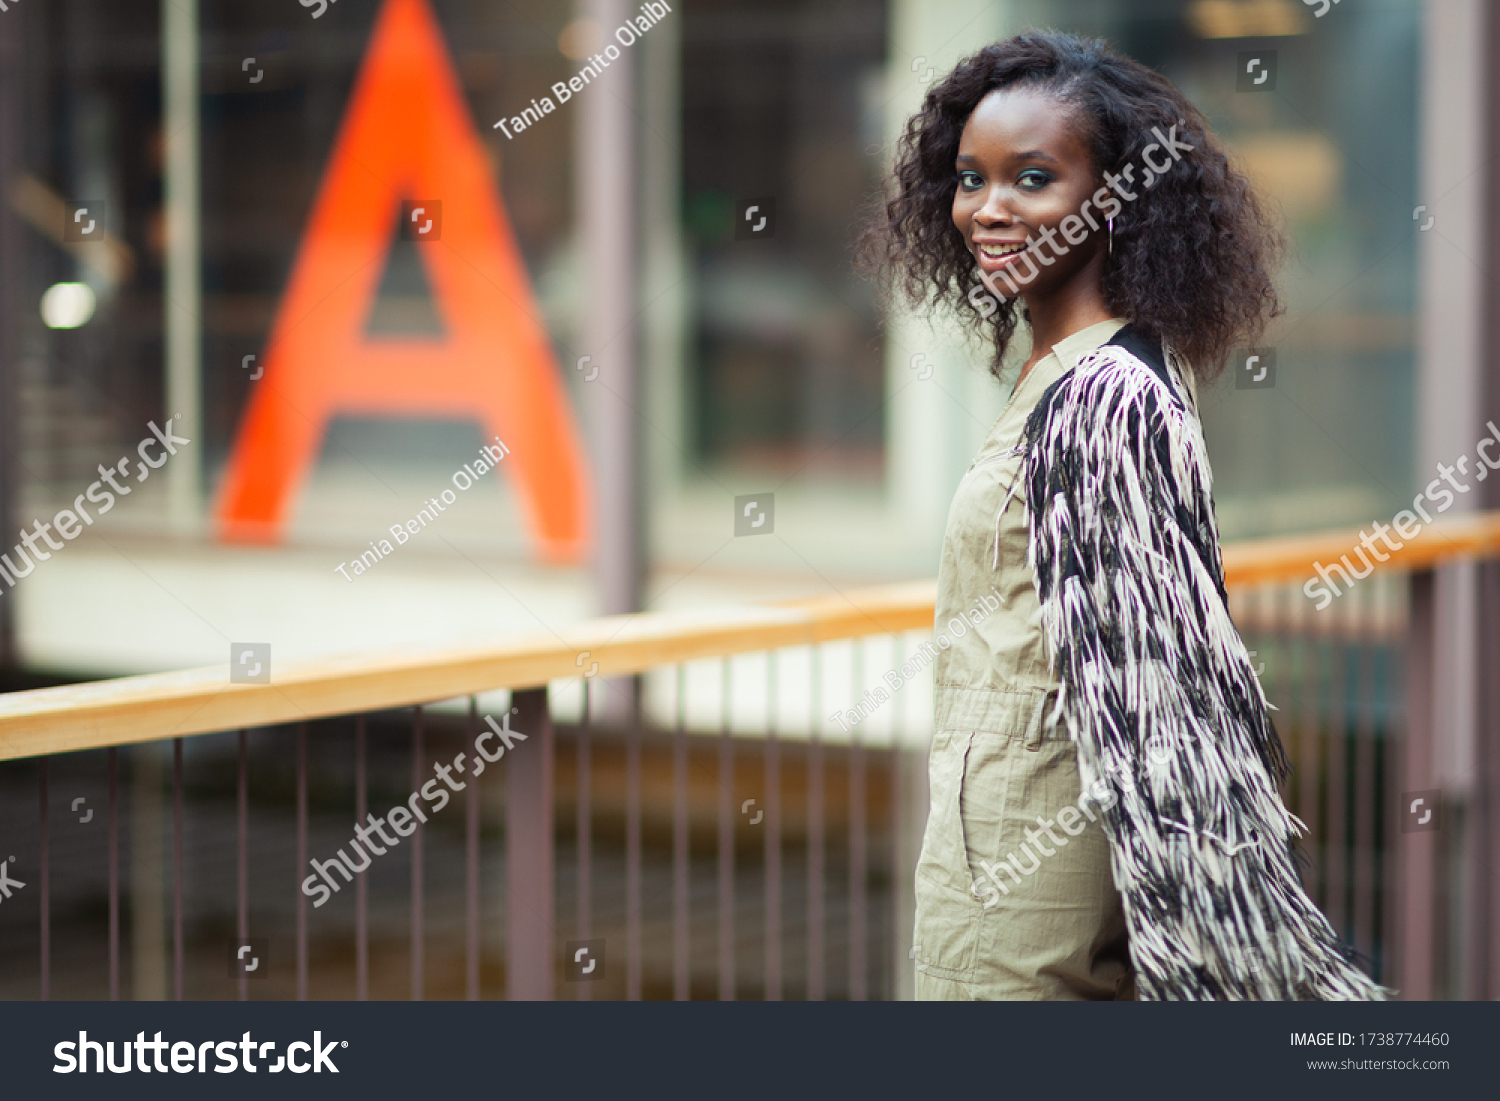 Attractive Young Black Girl Wearing Fashionable Stock Photo 1738774460 ...